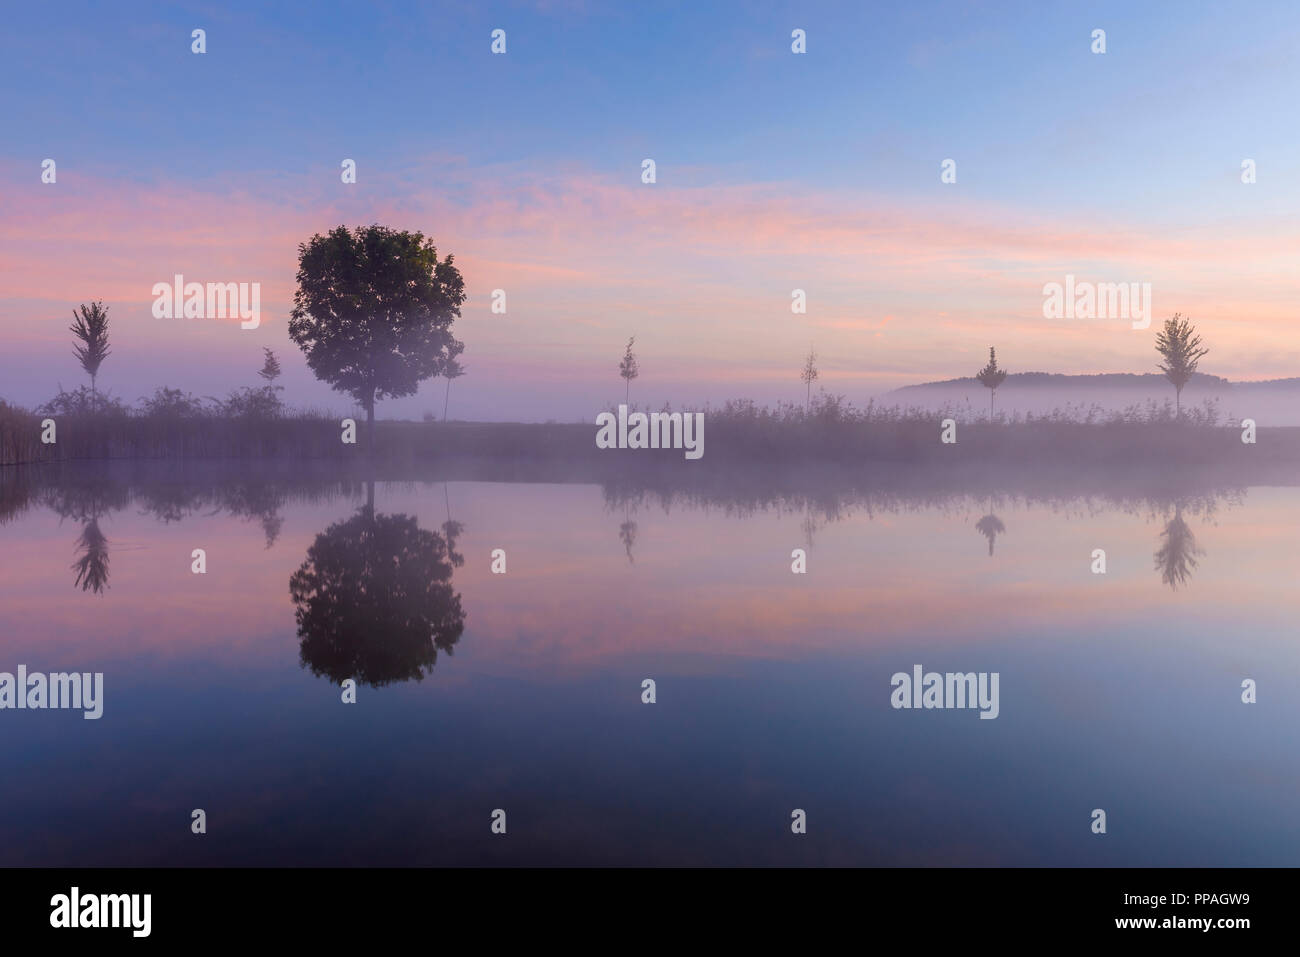 Landscape with Trees Reflecting in Lake at Dawn with Morning Mist, Drei Gleichen, Ilm District, Thuringia, Germany Stock Photo